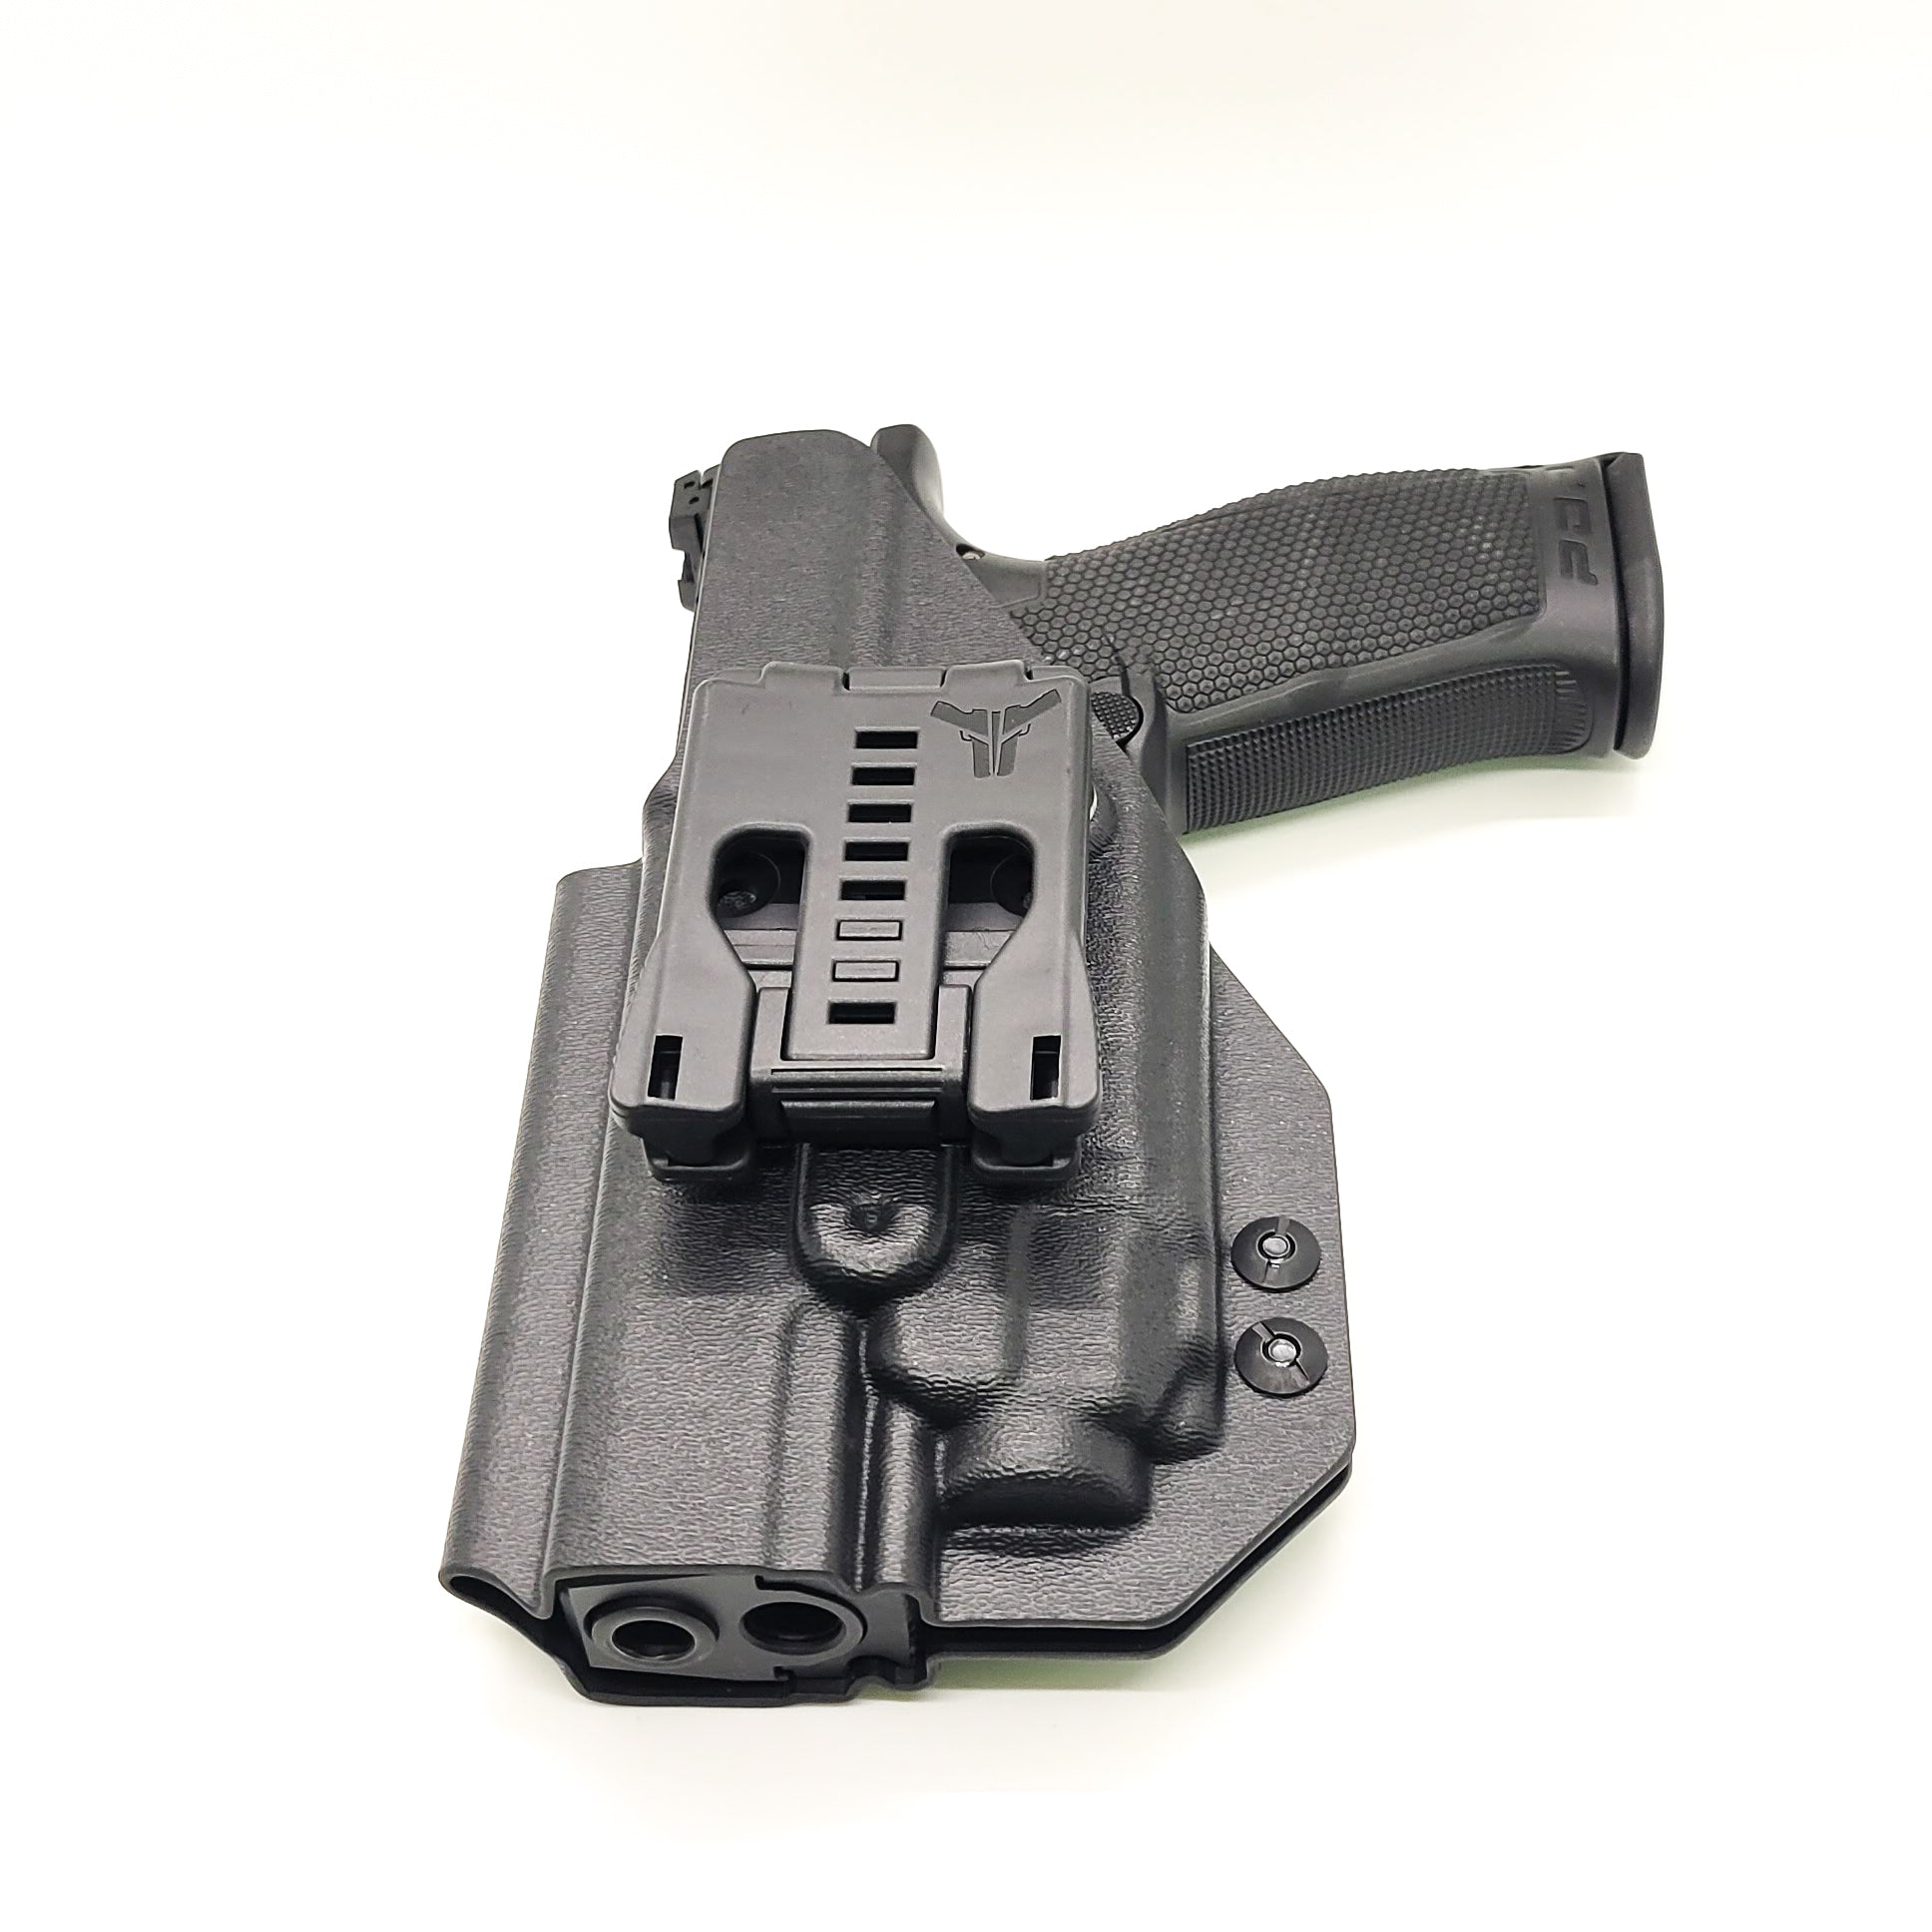 For the best Outside Waistband Taco Style Holster designed to fit the Walther PDP Pro SD Compact 4" pistol with the Streamlight TLR-8 mounted on the firearm, shop Four Brothers Holsters. Cut for red dot sight, full sweat guard, adjustable retention & open muzzle for threaded barrels & compensators.